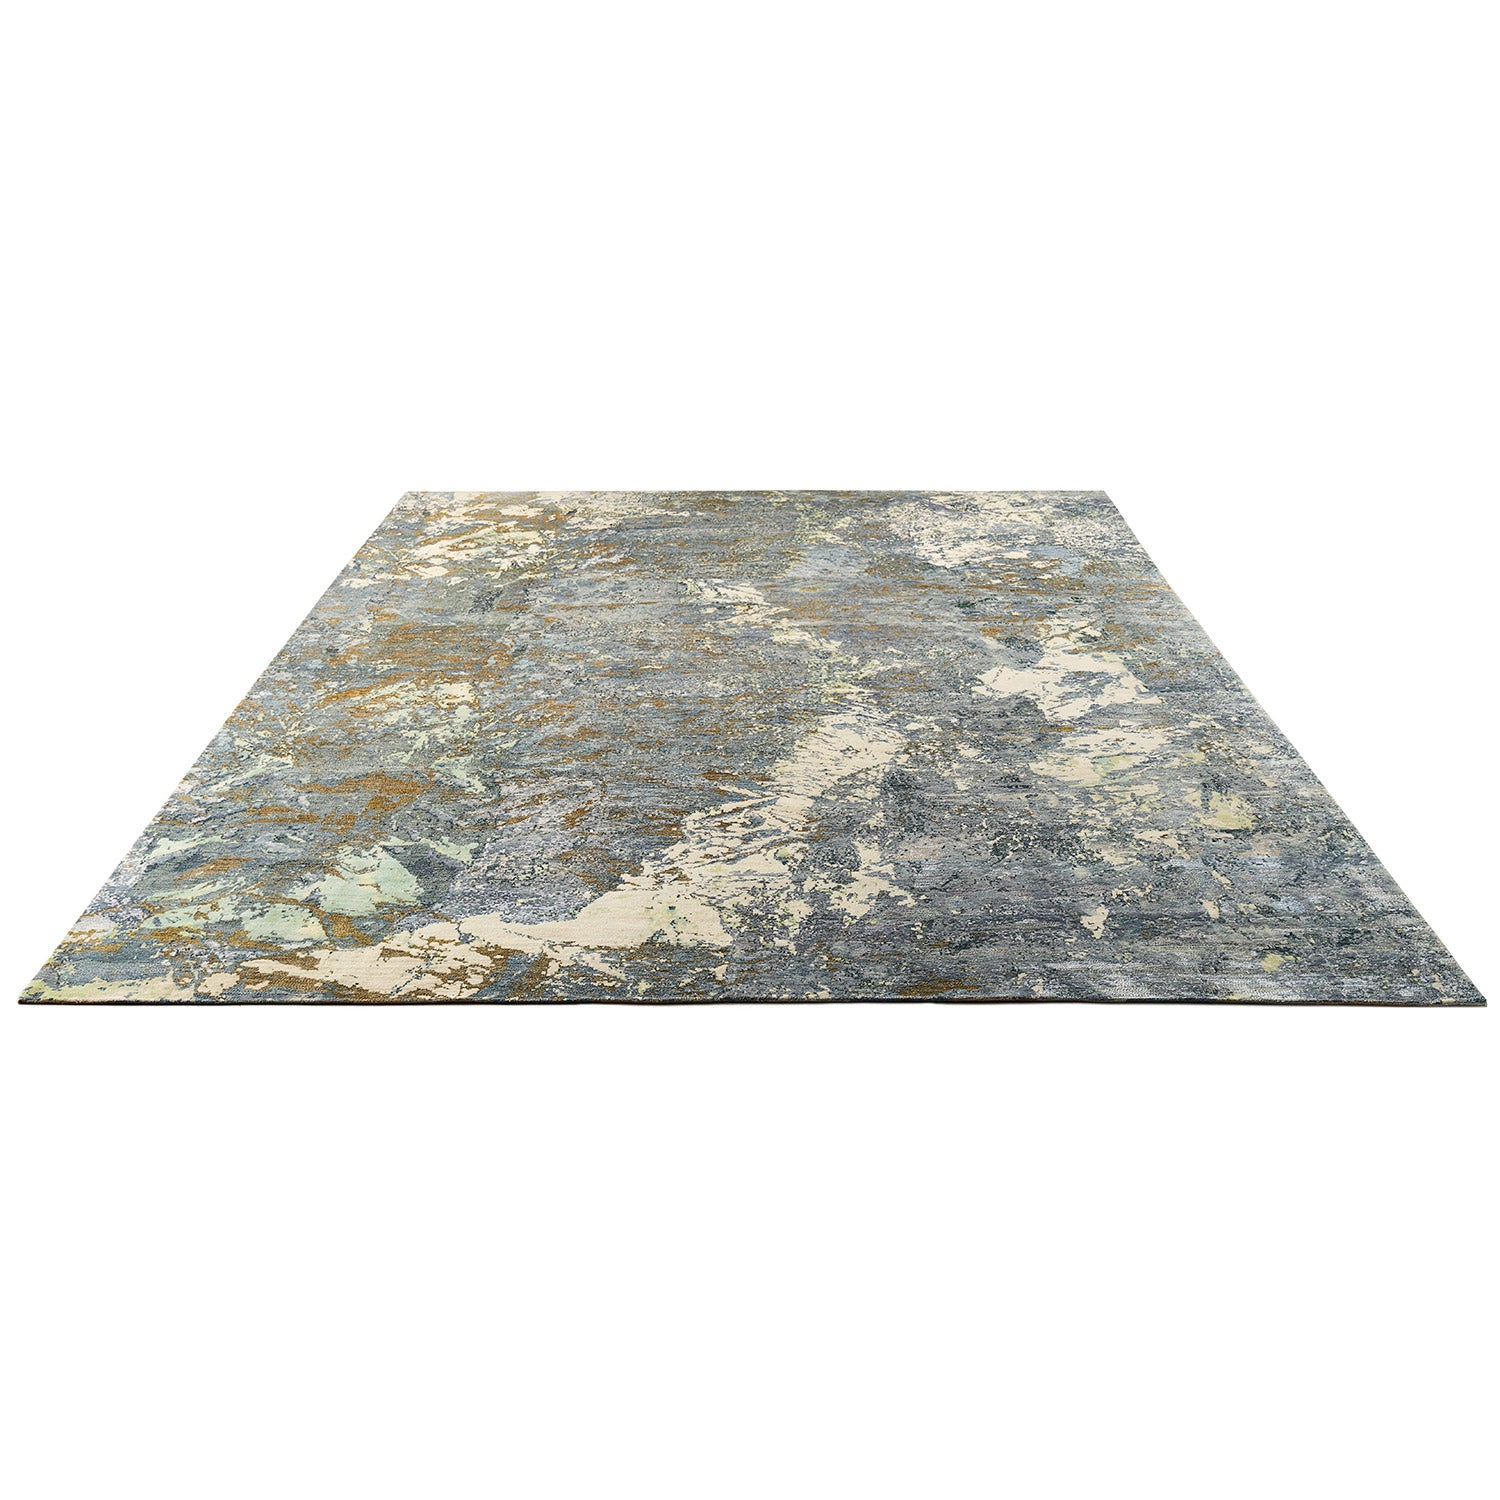 Abstract distressed rug with modern rustic aesthetic in various colors.